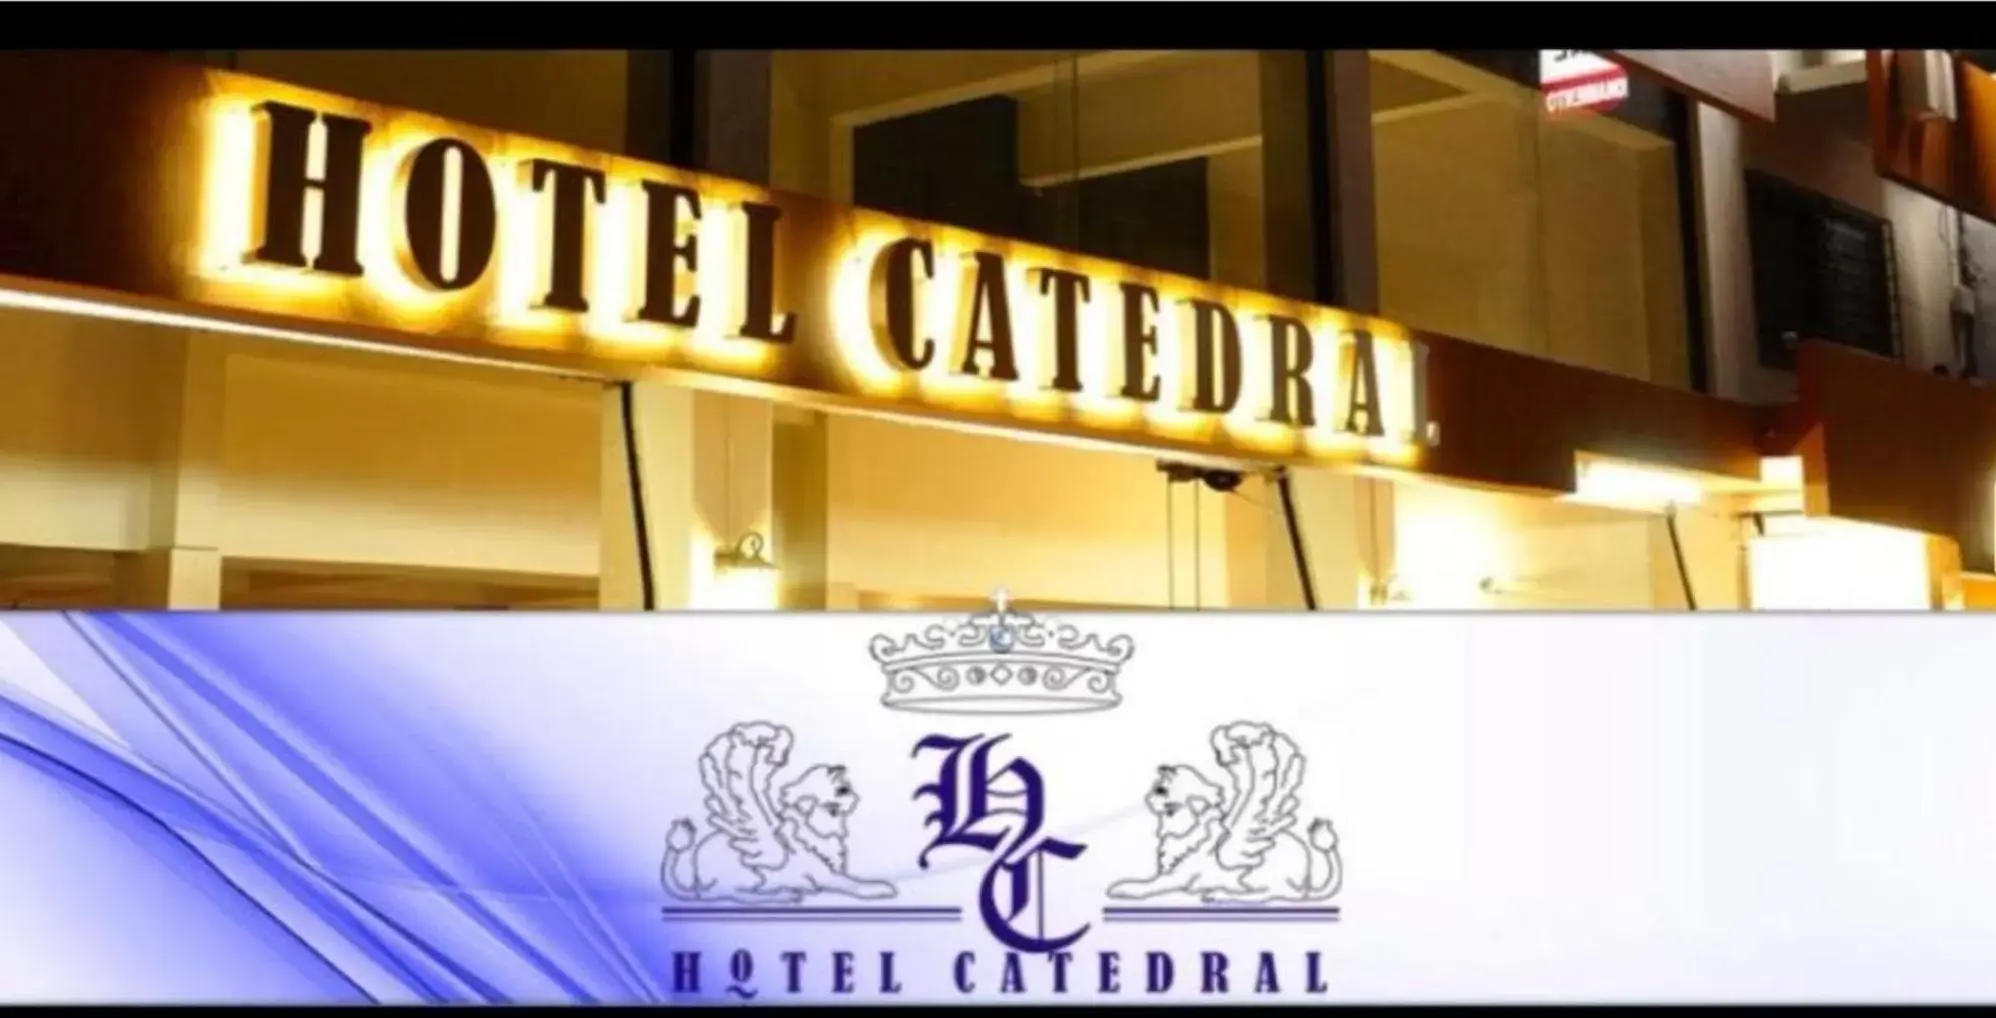 Property Logo/Sign in Hotel Catedral